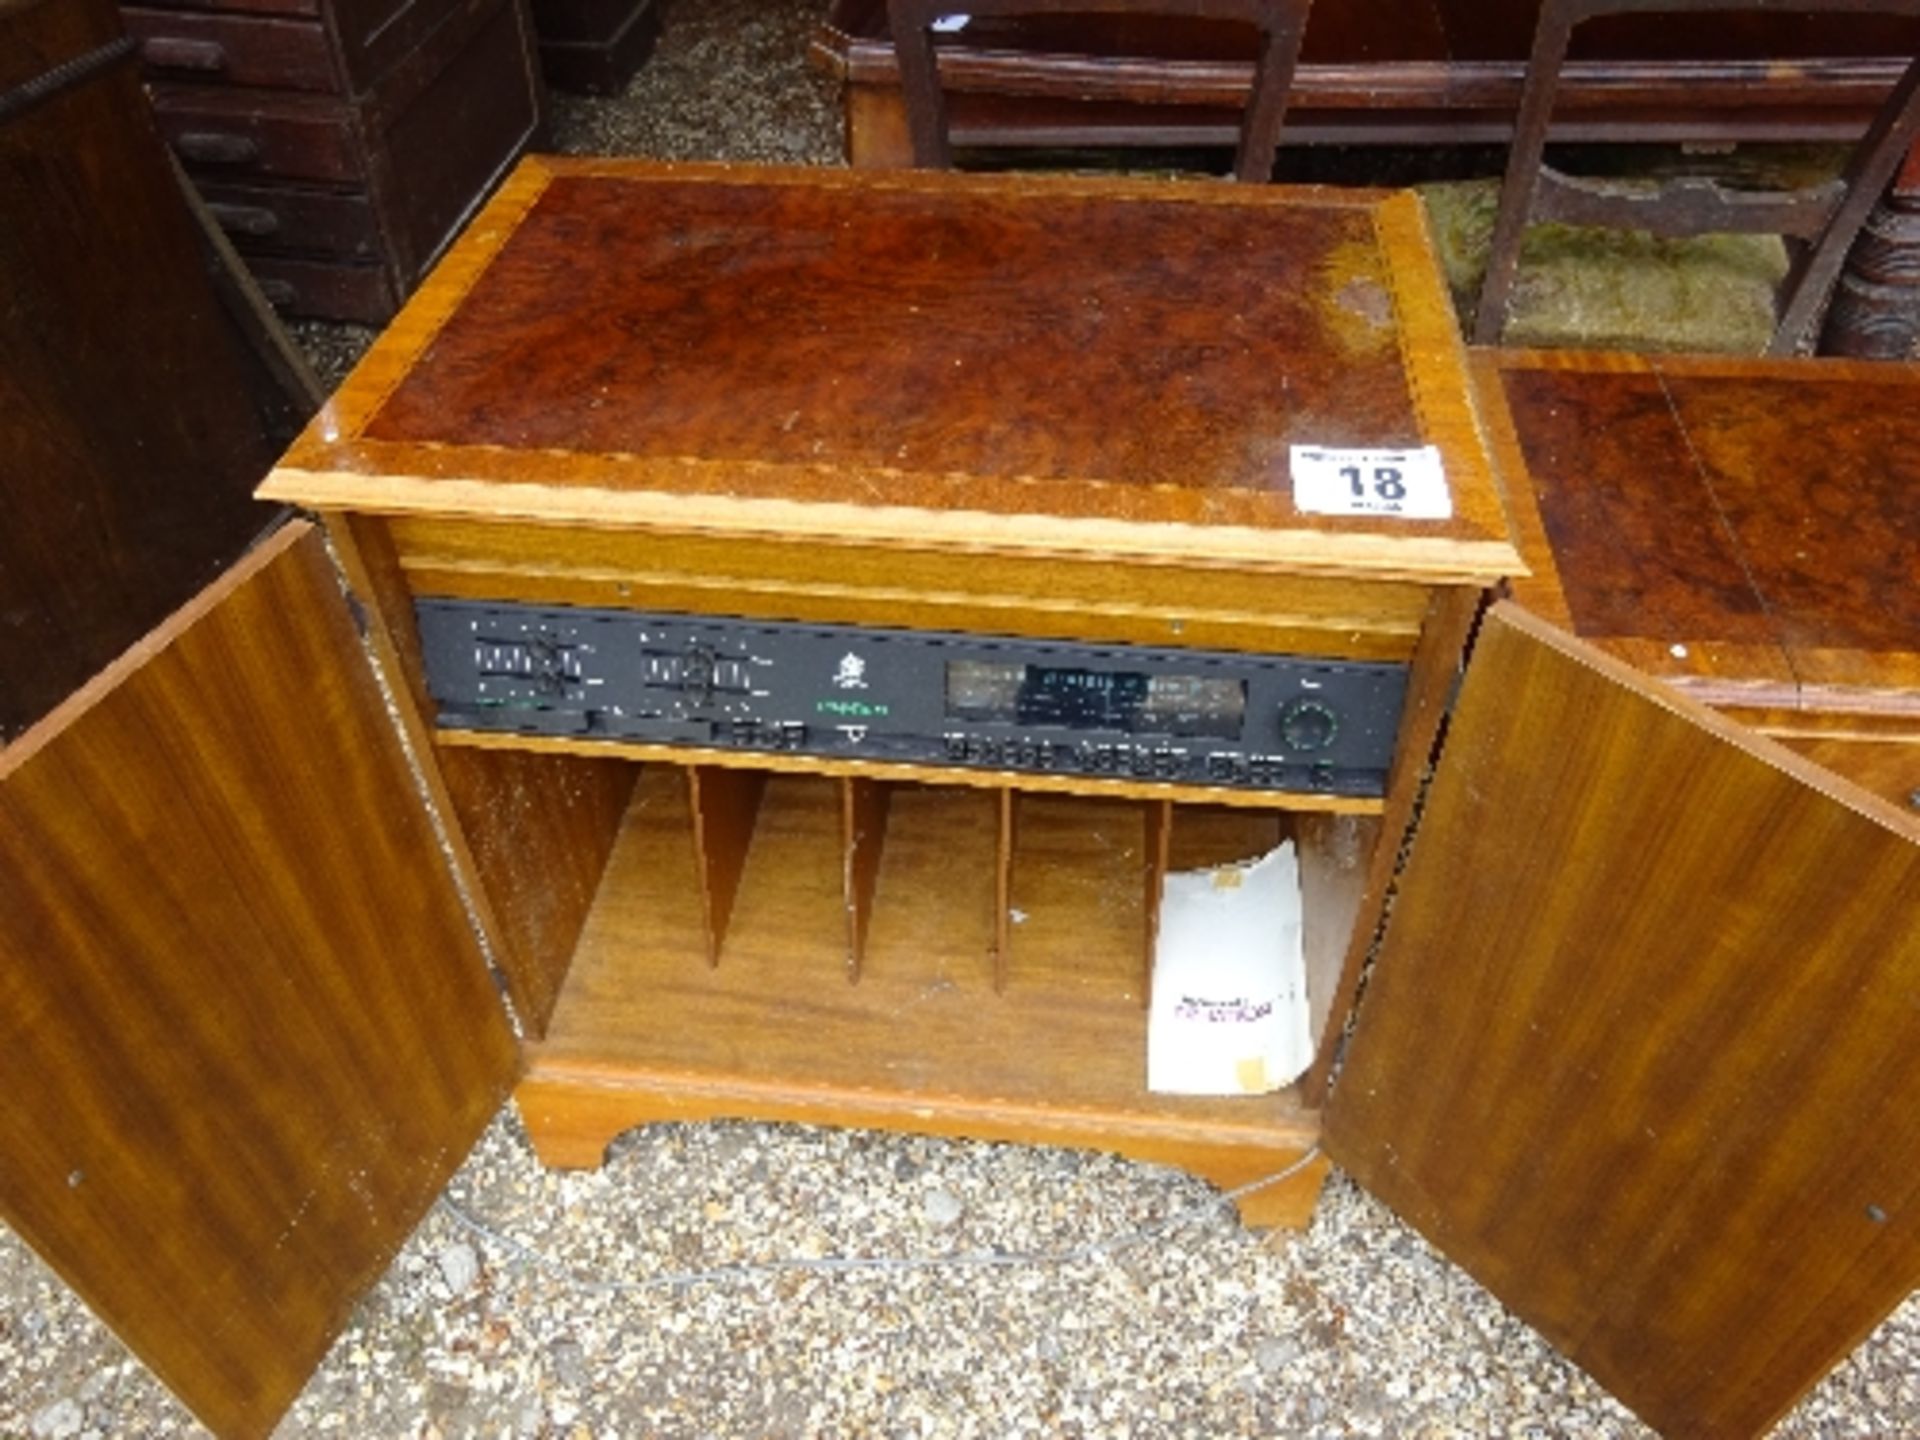 Dynatron radiogram with cassette recorder